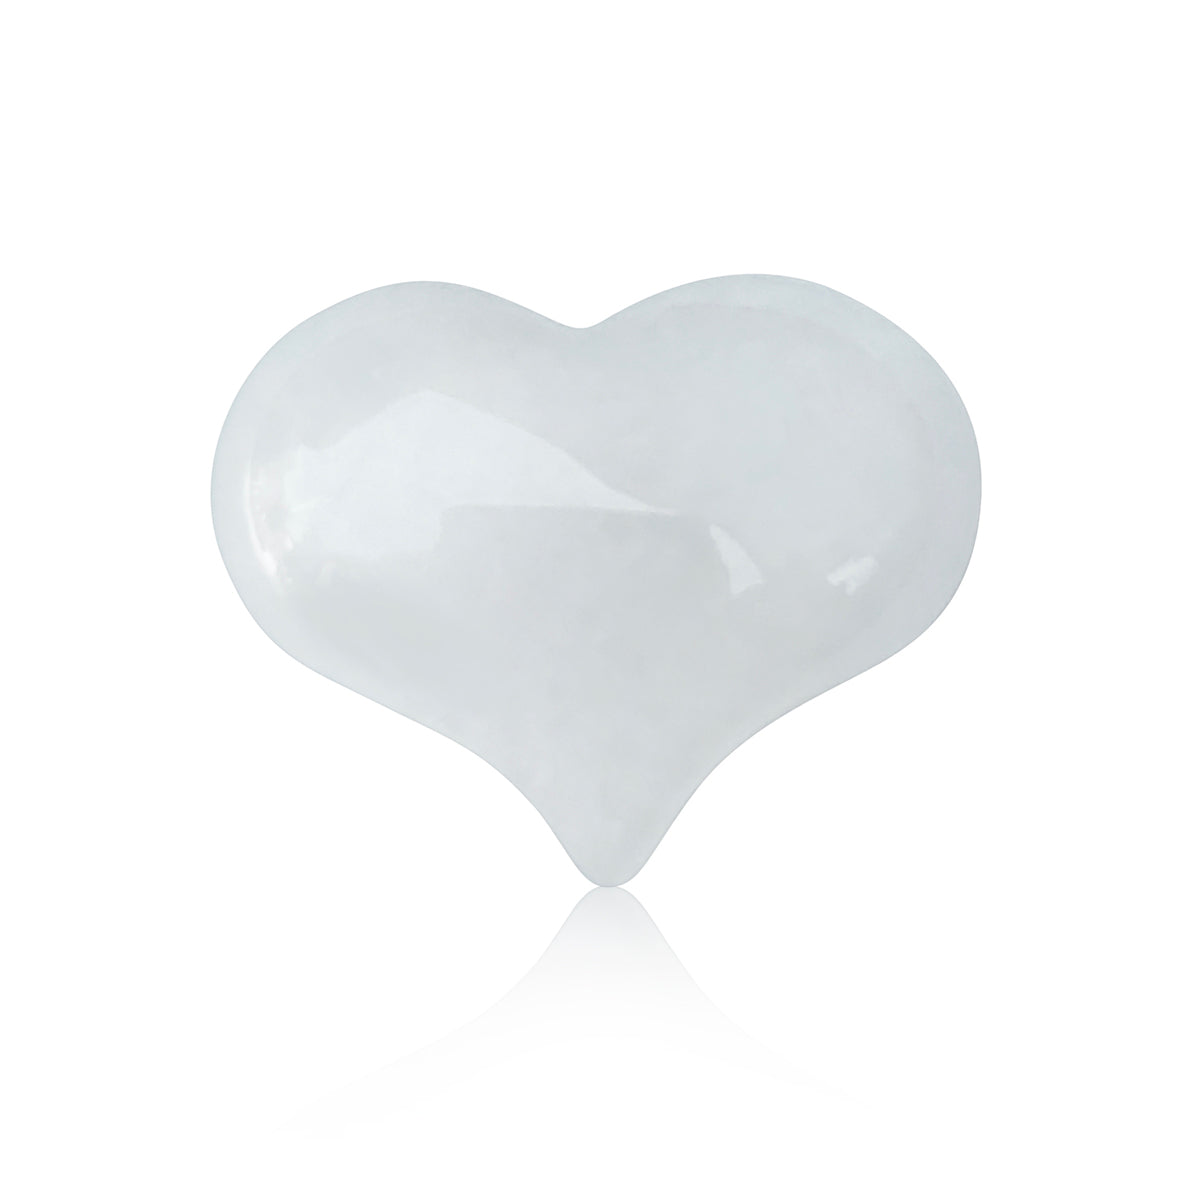 White Jade Heart Shaped Healing Gemstone Projecting Universal Love.  Jade is a very popular gemstone projecting universal love, health, wealth and long life.  Said to be a “Very Lucky Stone”, Jade is associated with peace, serenity, memory, vitality, harmony, wisdom, and long life. 